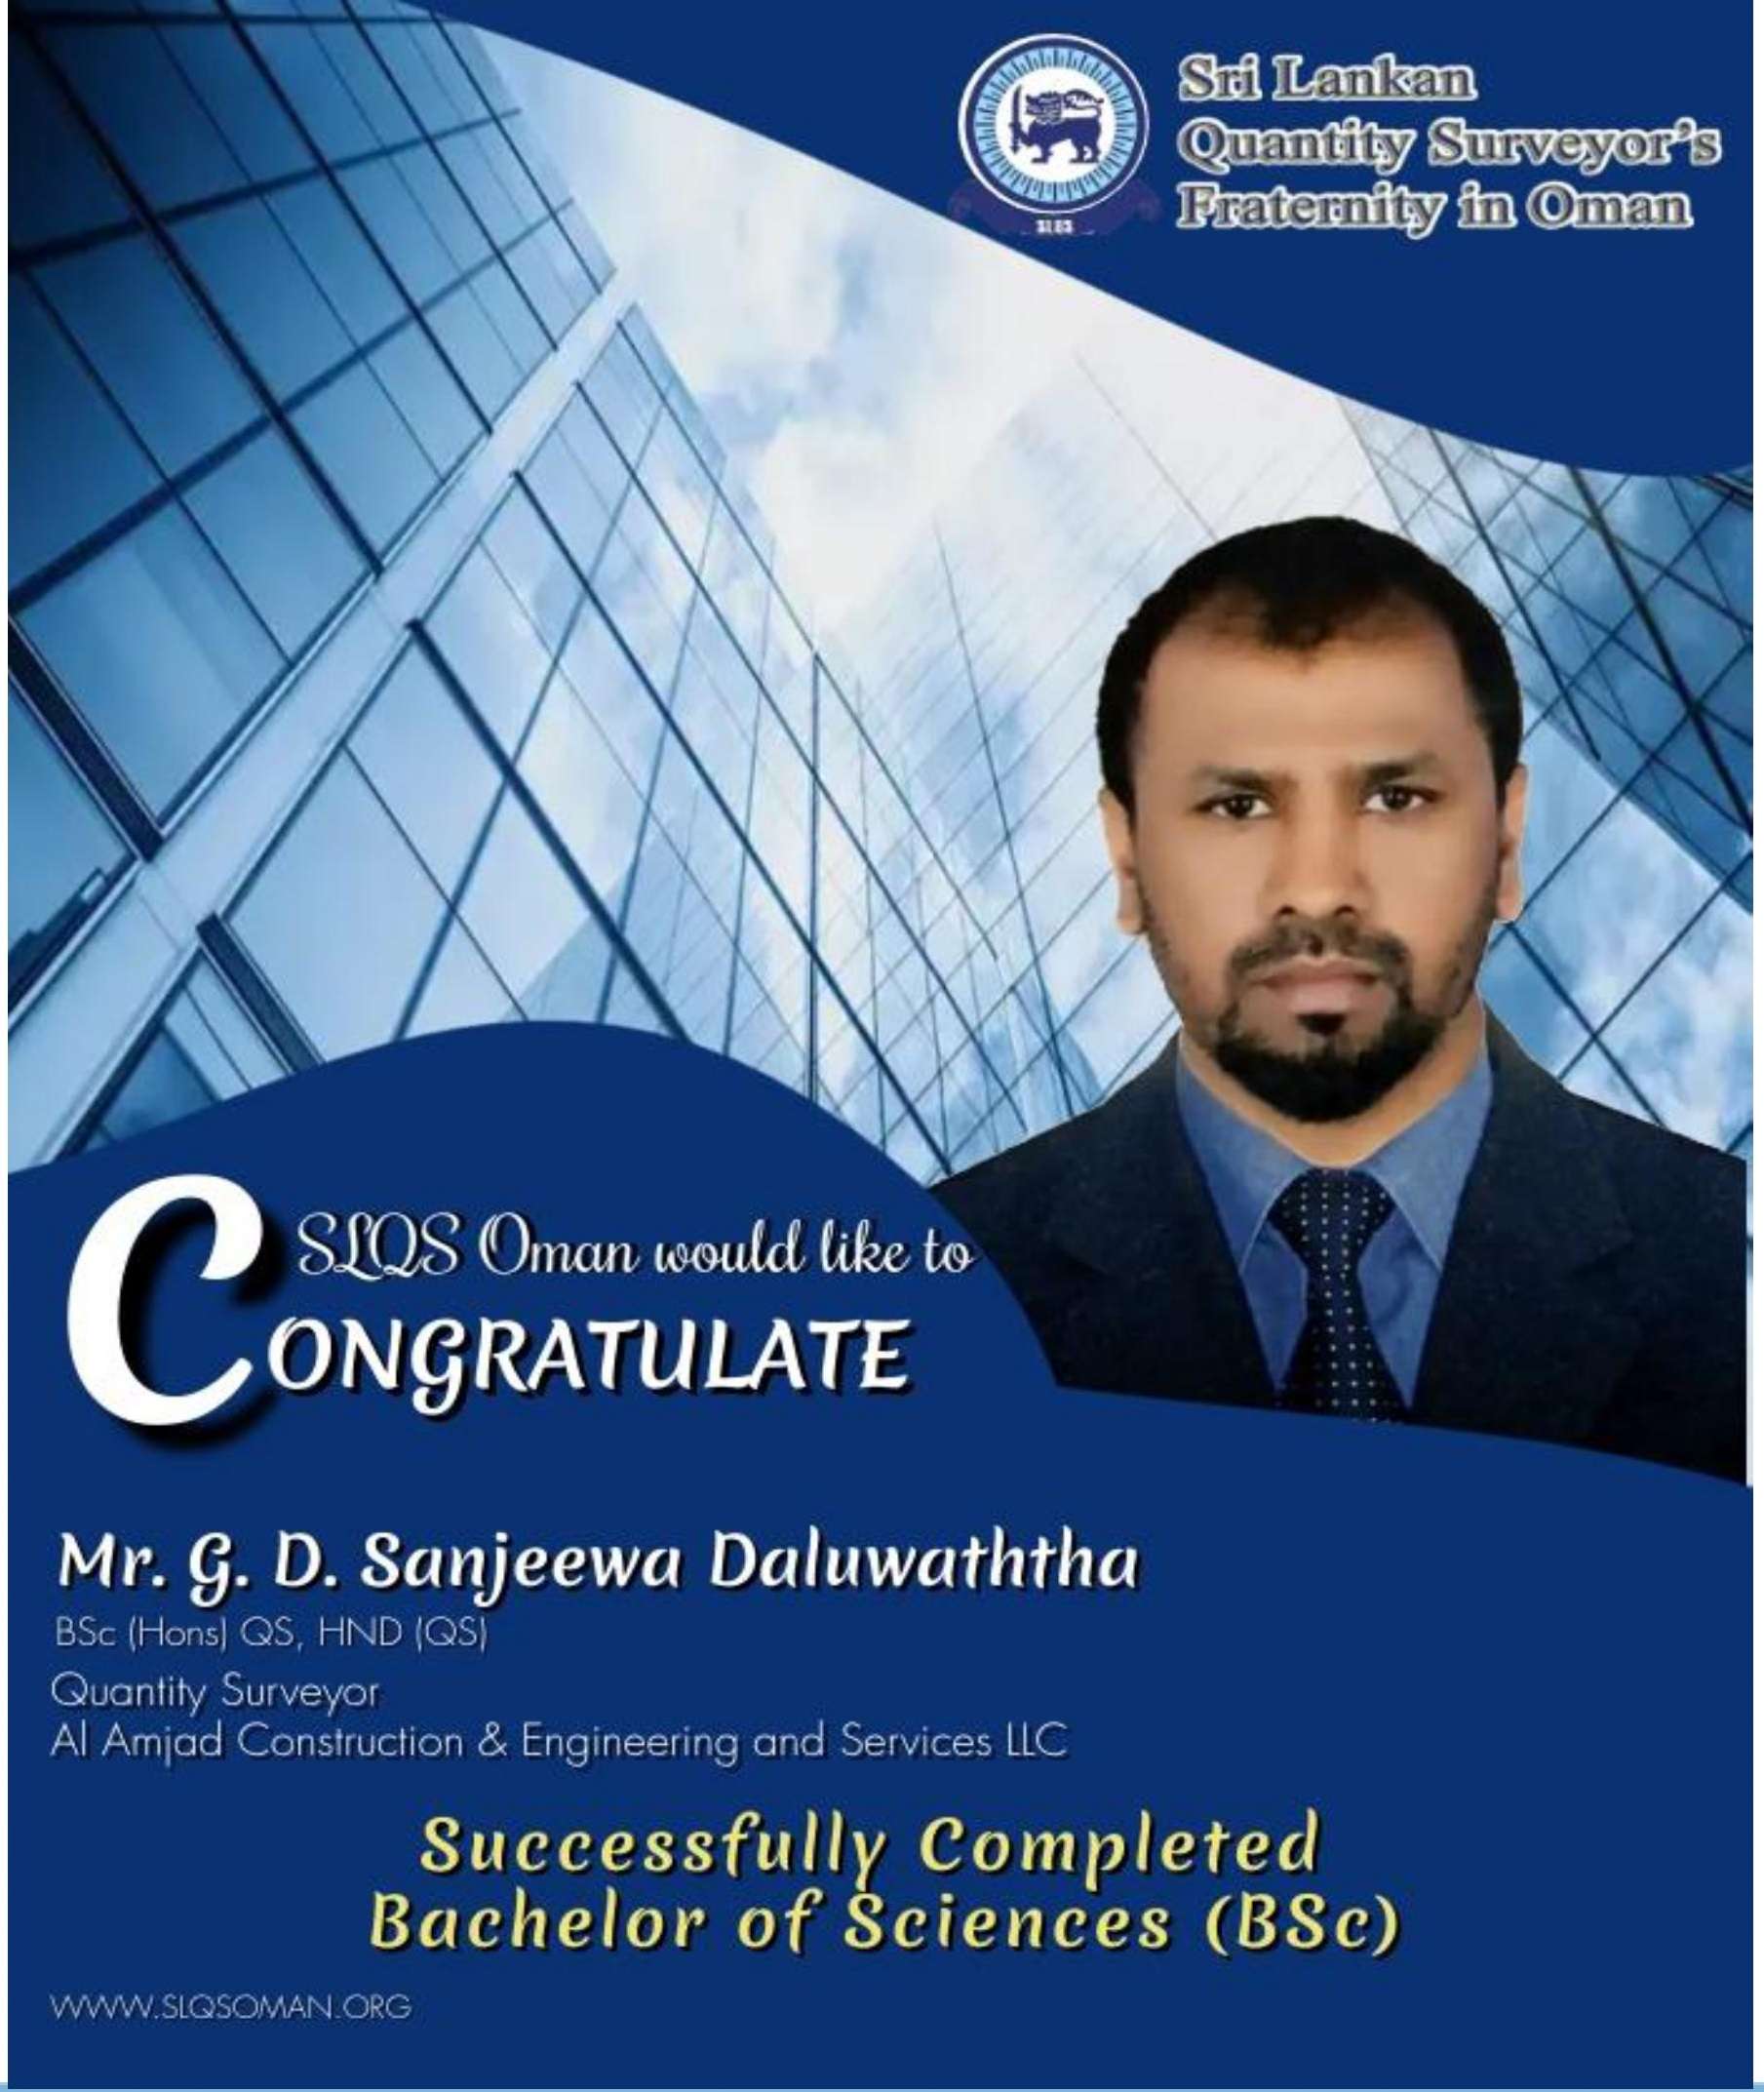 Congratulations!! Mr. Sanjeewa Daluwaththa!! For successfully completion of BSc.